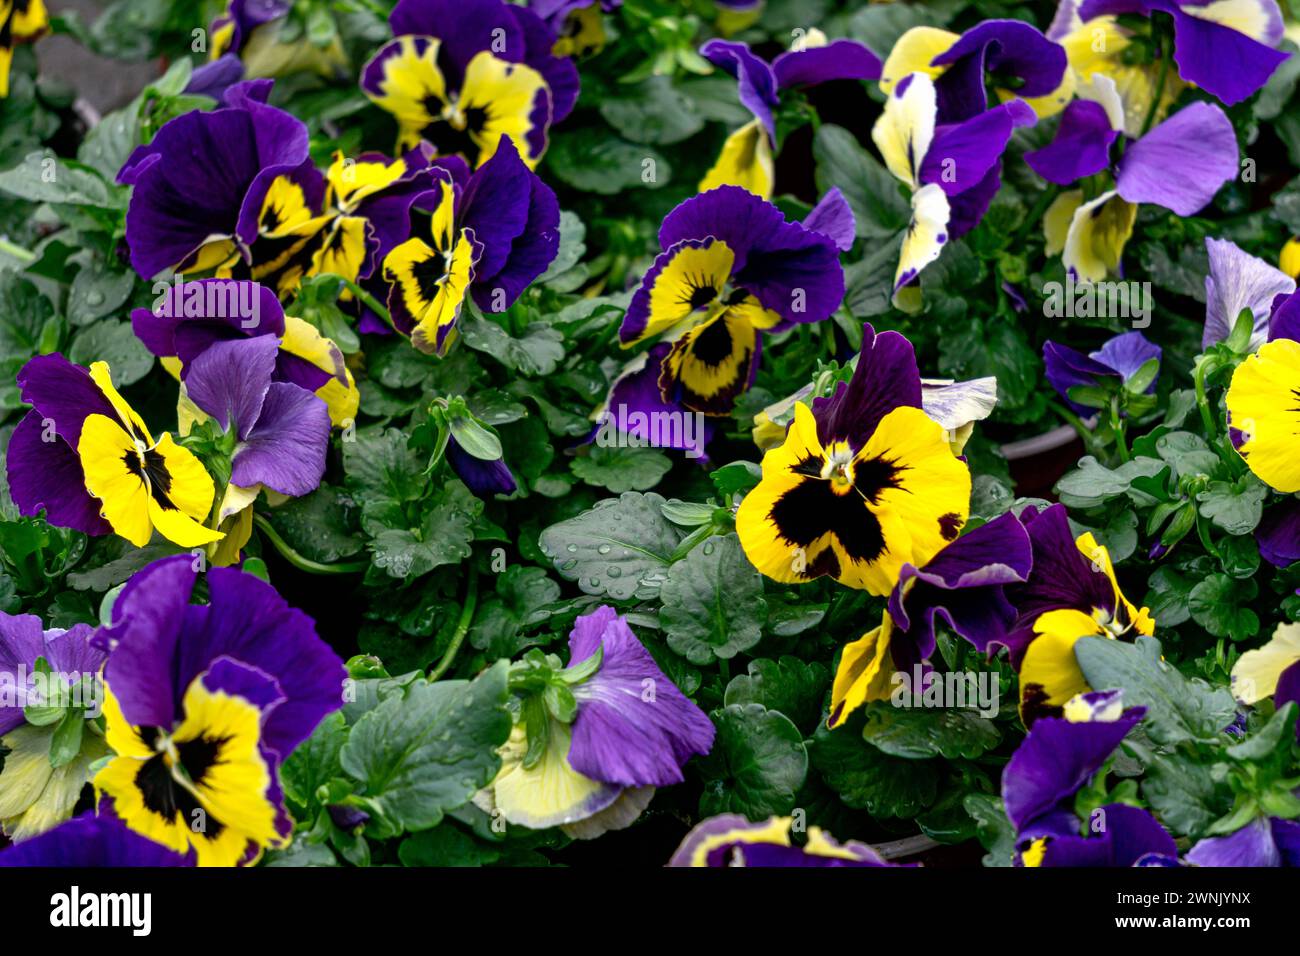 Blue-yellow pansies in flower pots in a greenhouse Stock Photo